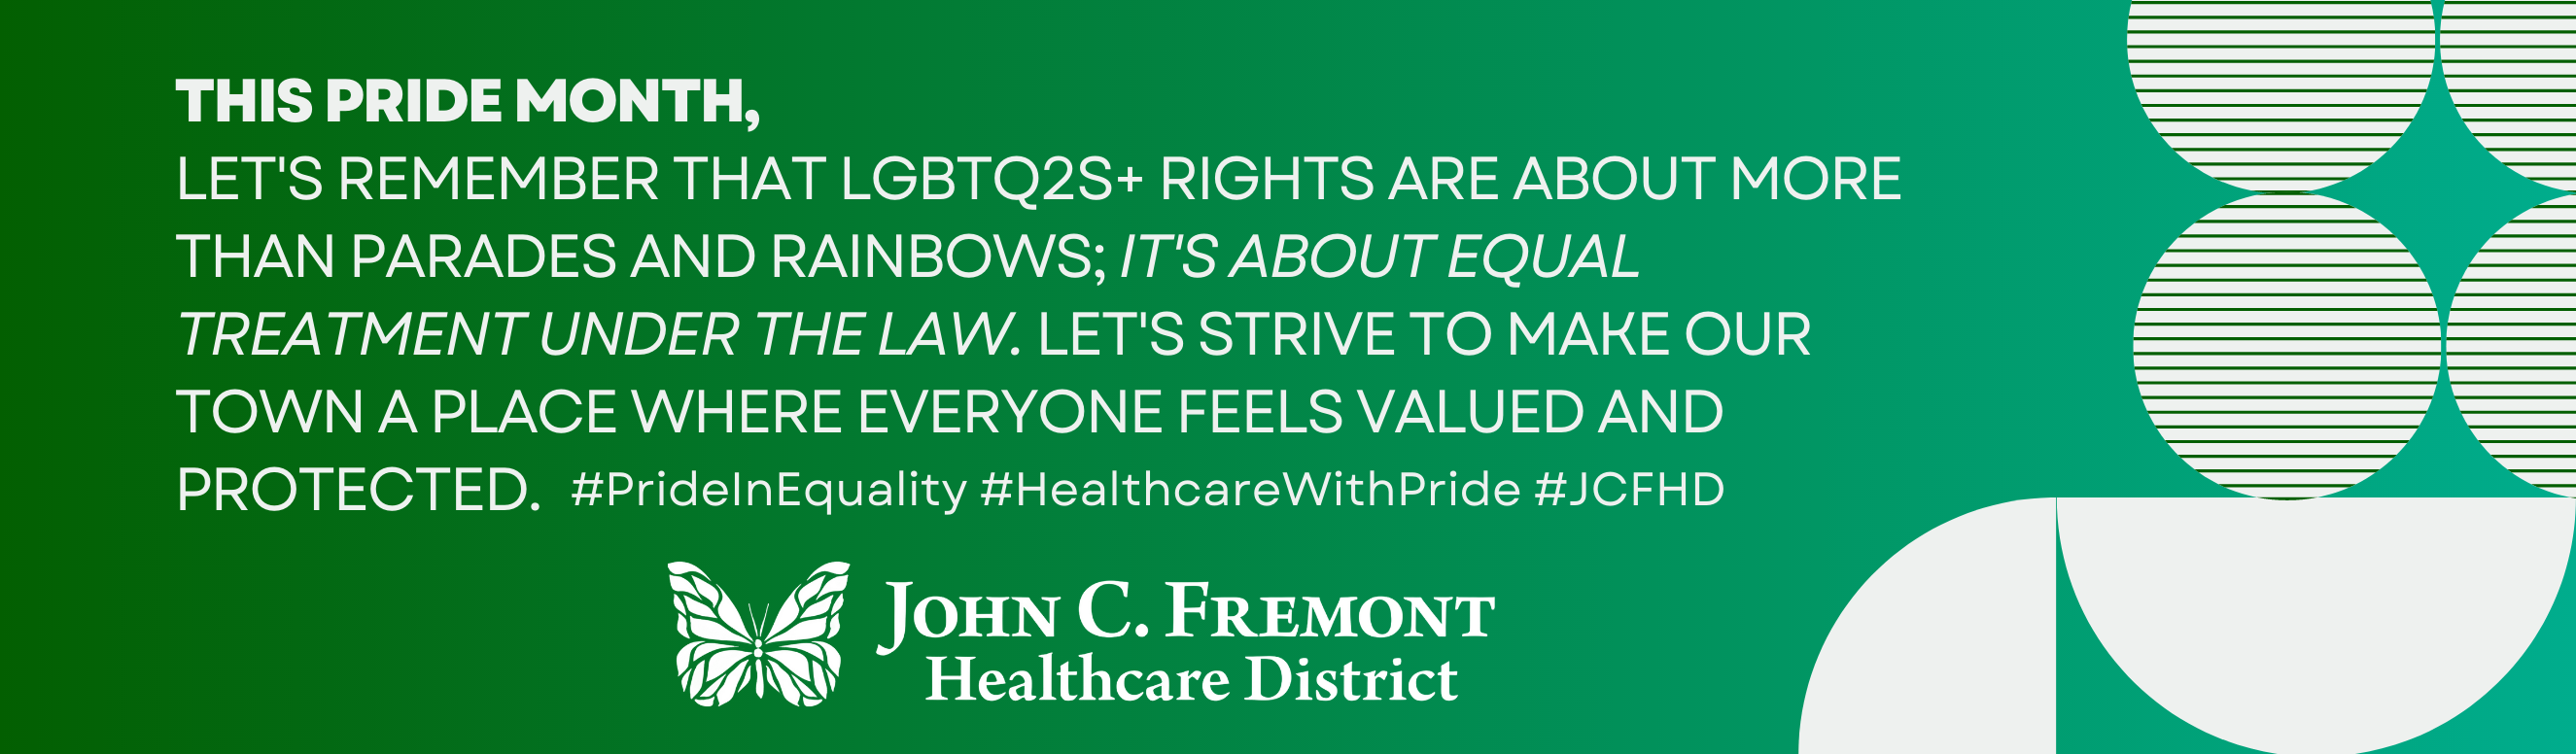 This Pride Month, 
let's remember that LGBTQ2S+ rights are about more than parades and rainbows; it's about equal treatment under the law. Let's strive to make our town a place where everyone feels valued and protected.#PrideInEquality #HealthcareWithPride #JCFHD